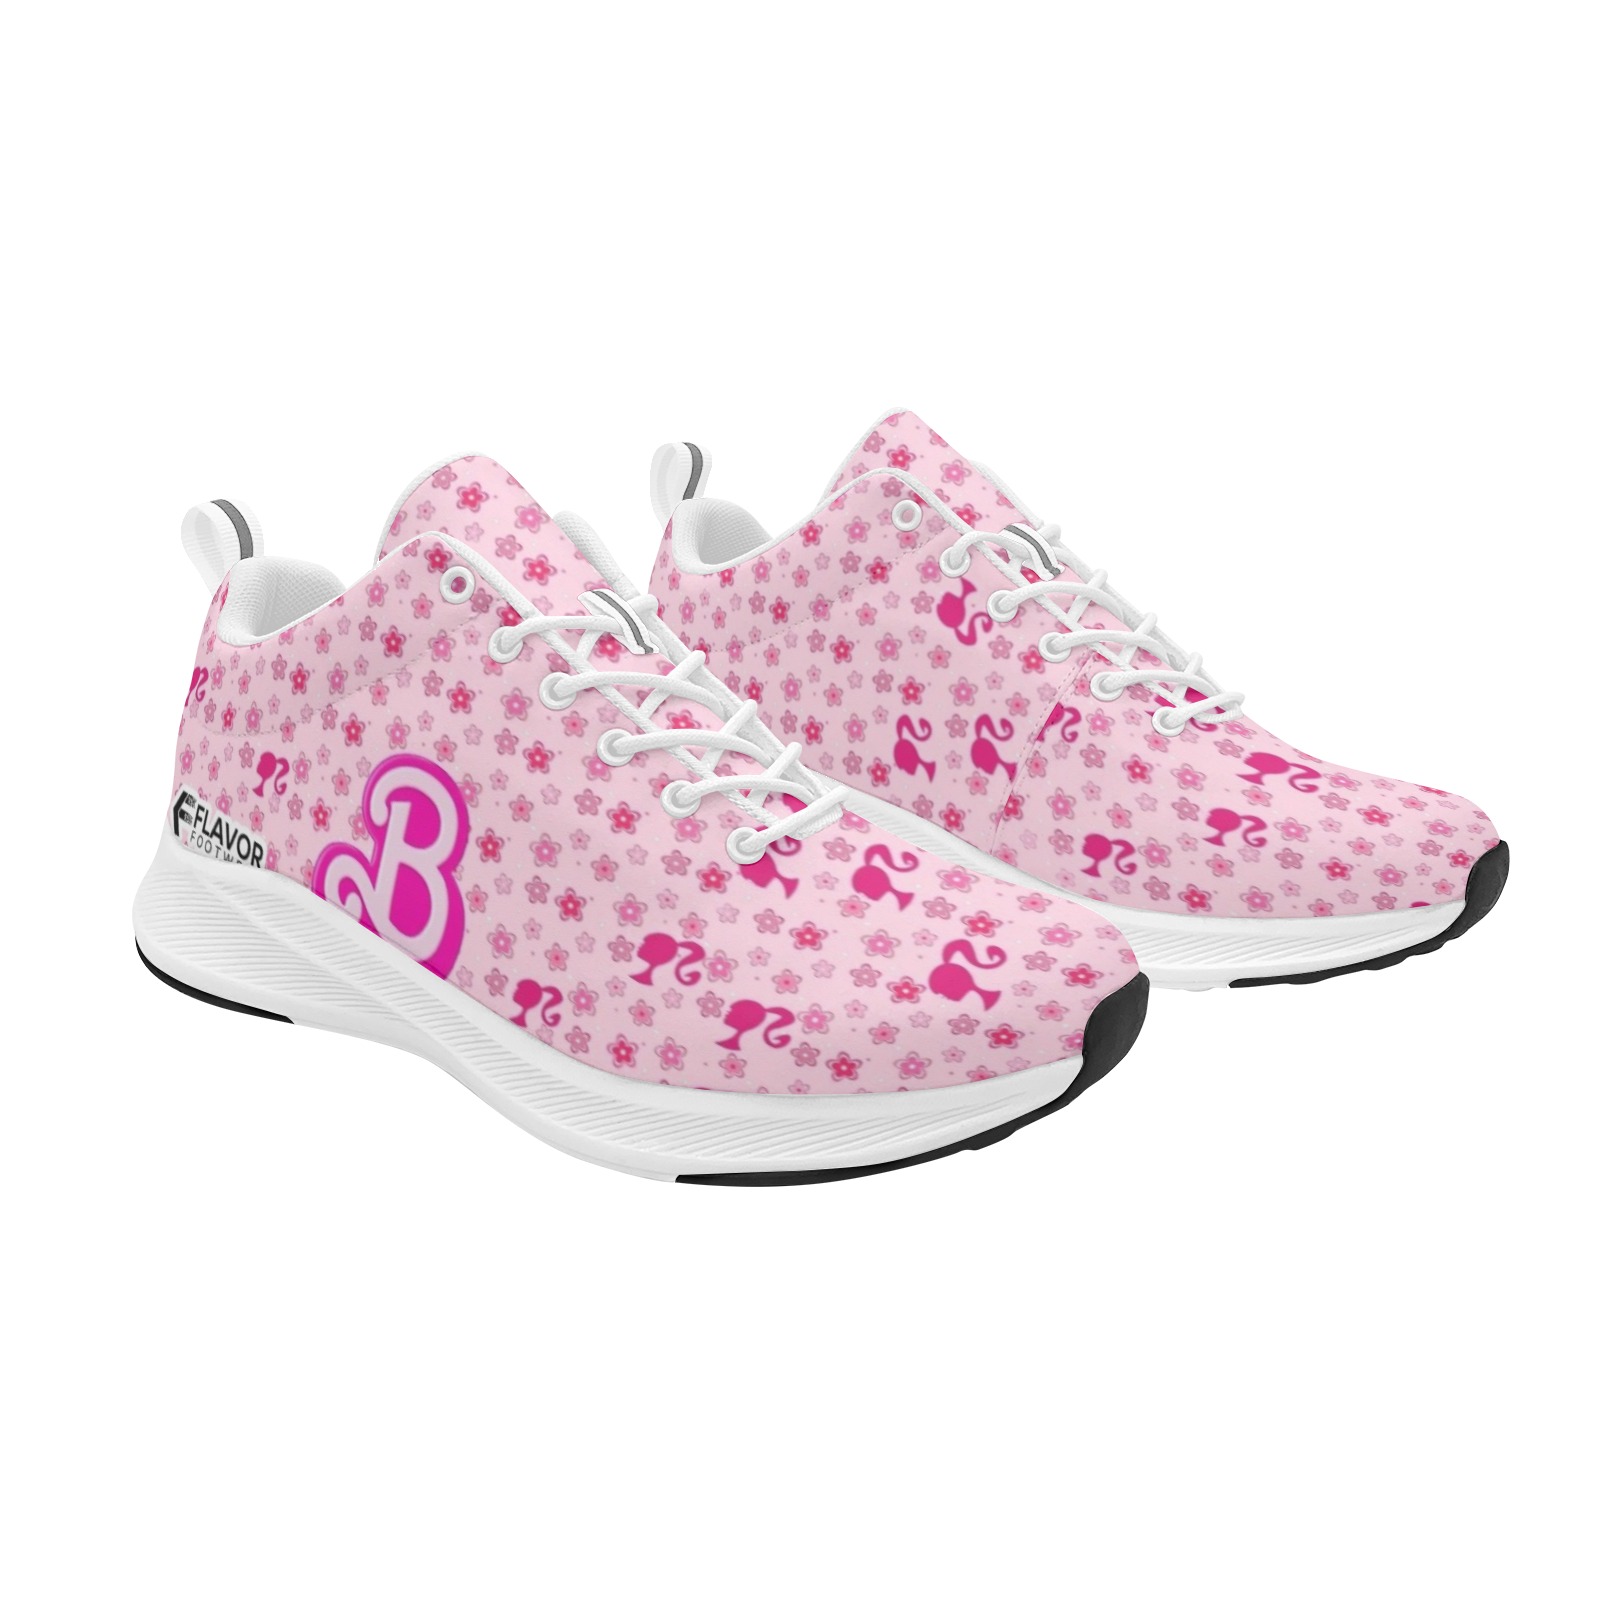 Rosy Pink Running Shoe Collection 01 Women's Alpha Running Shoes (Model 10093)